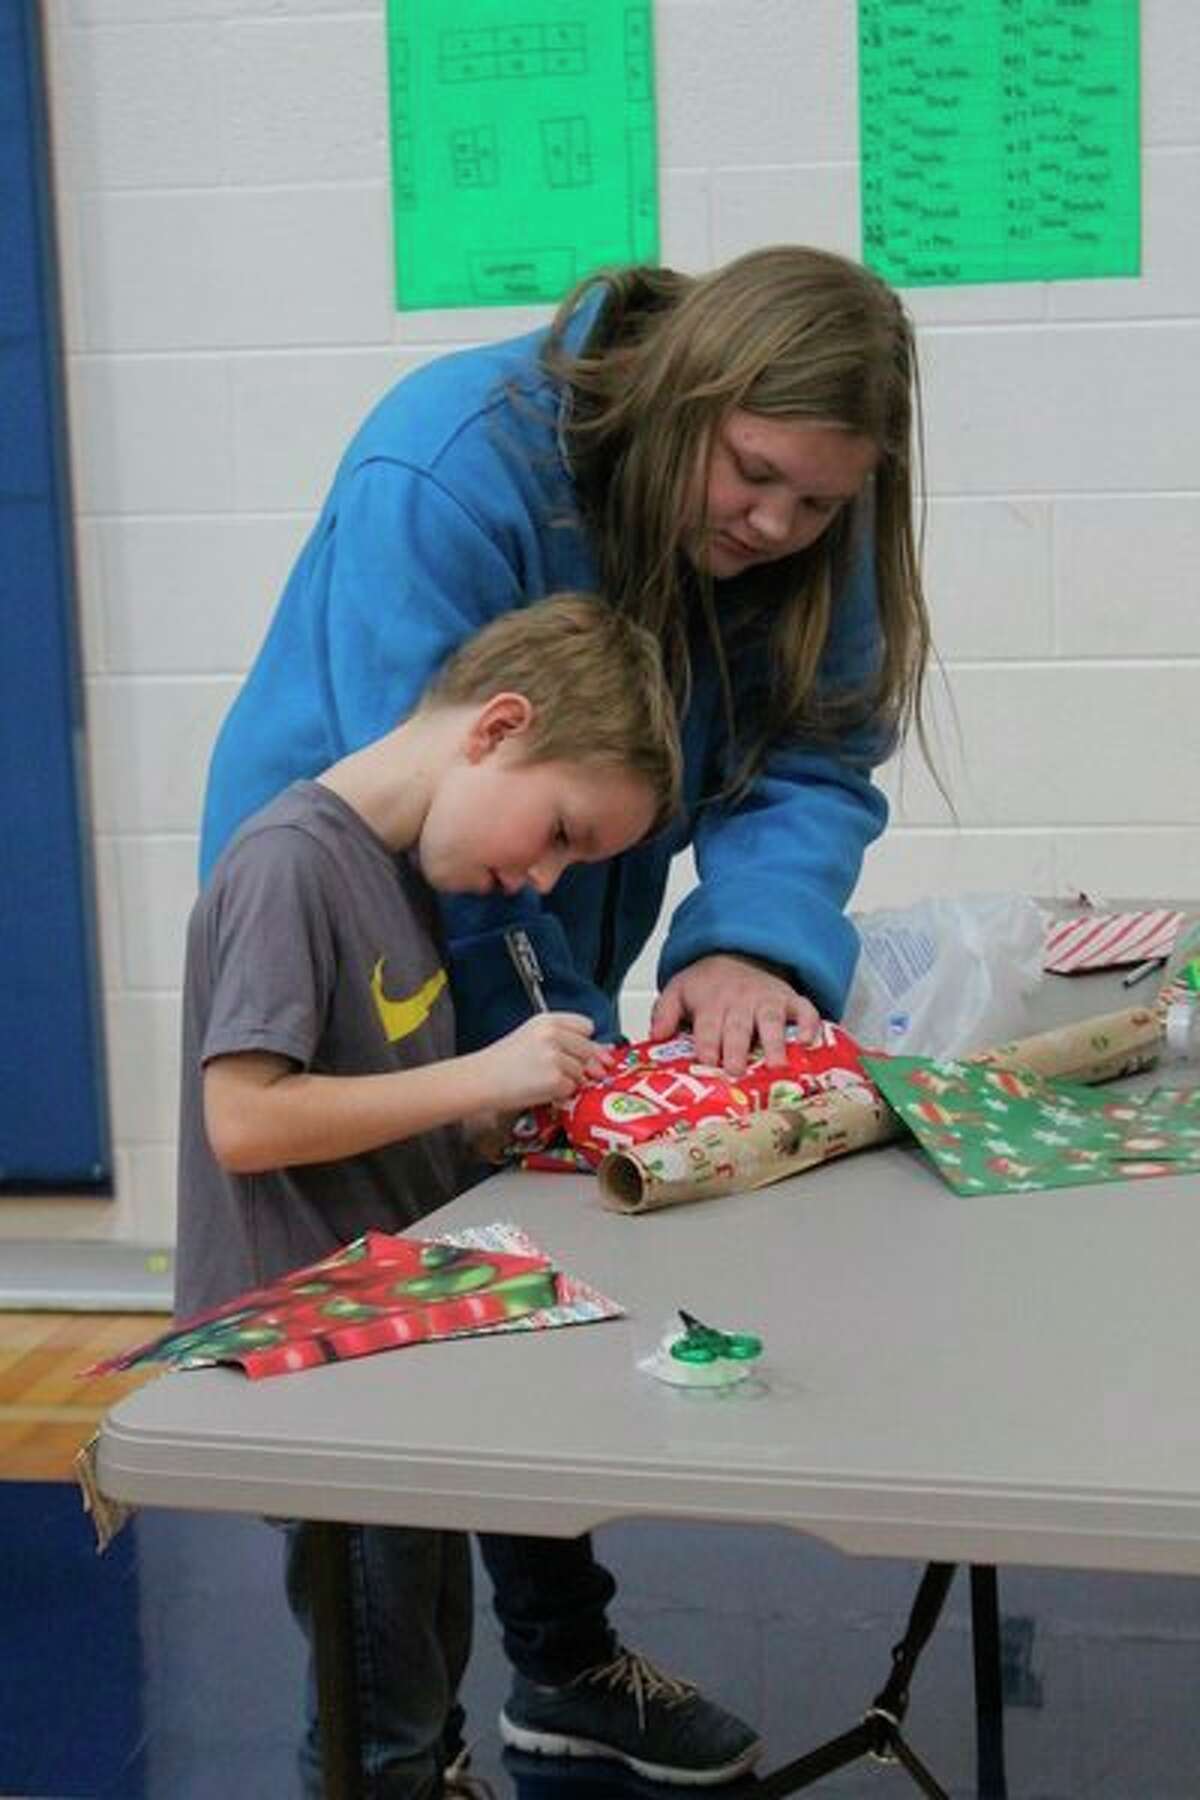 In one area of the gym, students gathered to get help writing their names on gift tags. (Pioneer photo/Catherine Sweeney)